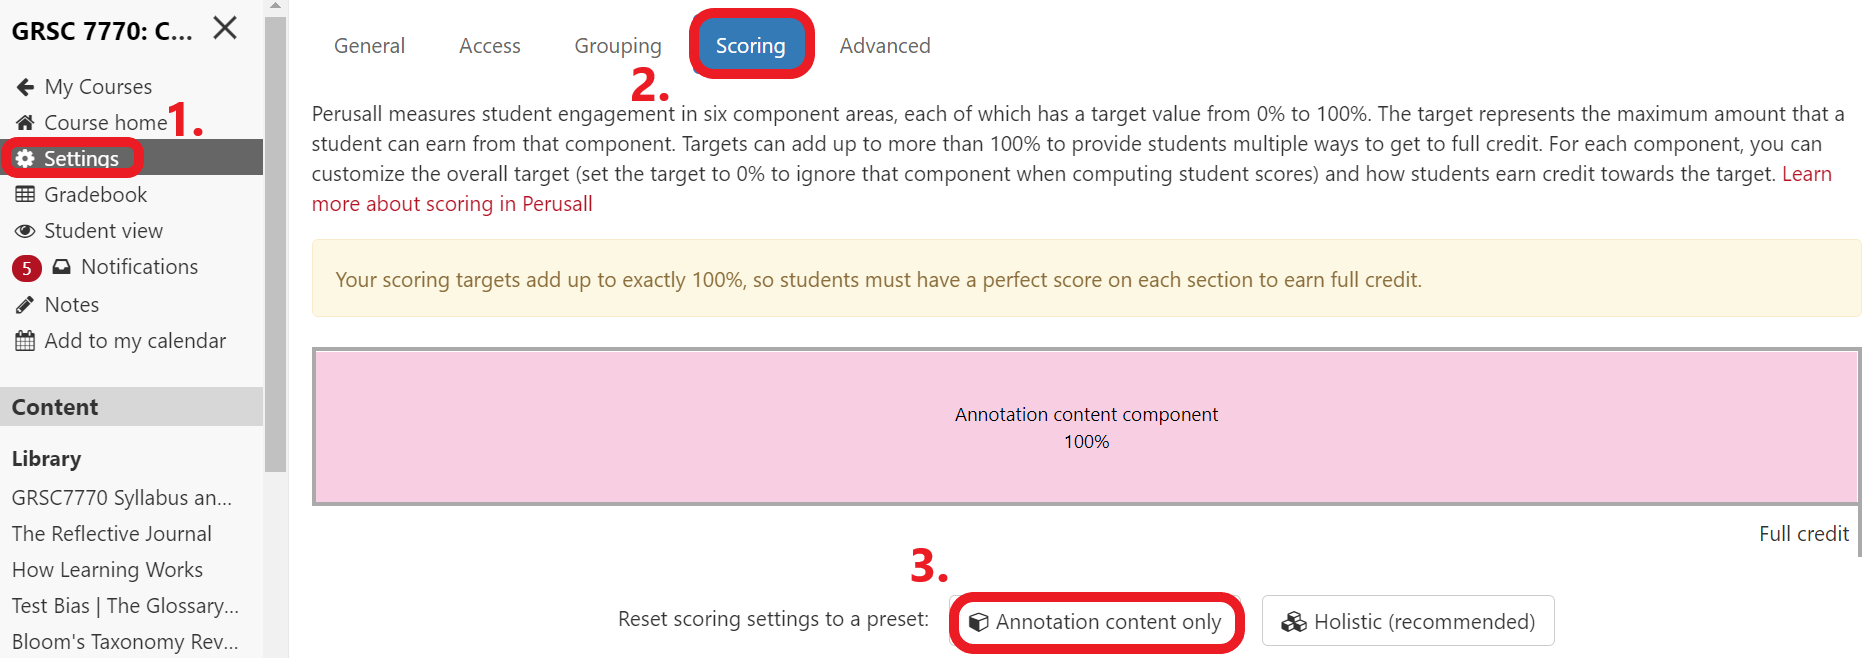 1. Select Settings 2. Select Scoring 3. Select Annotation content only